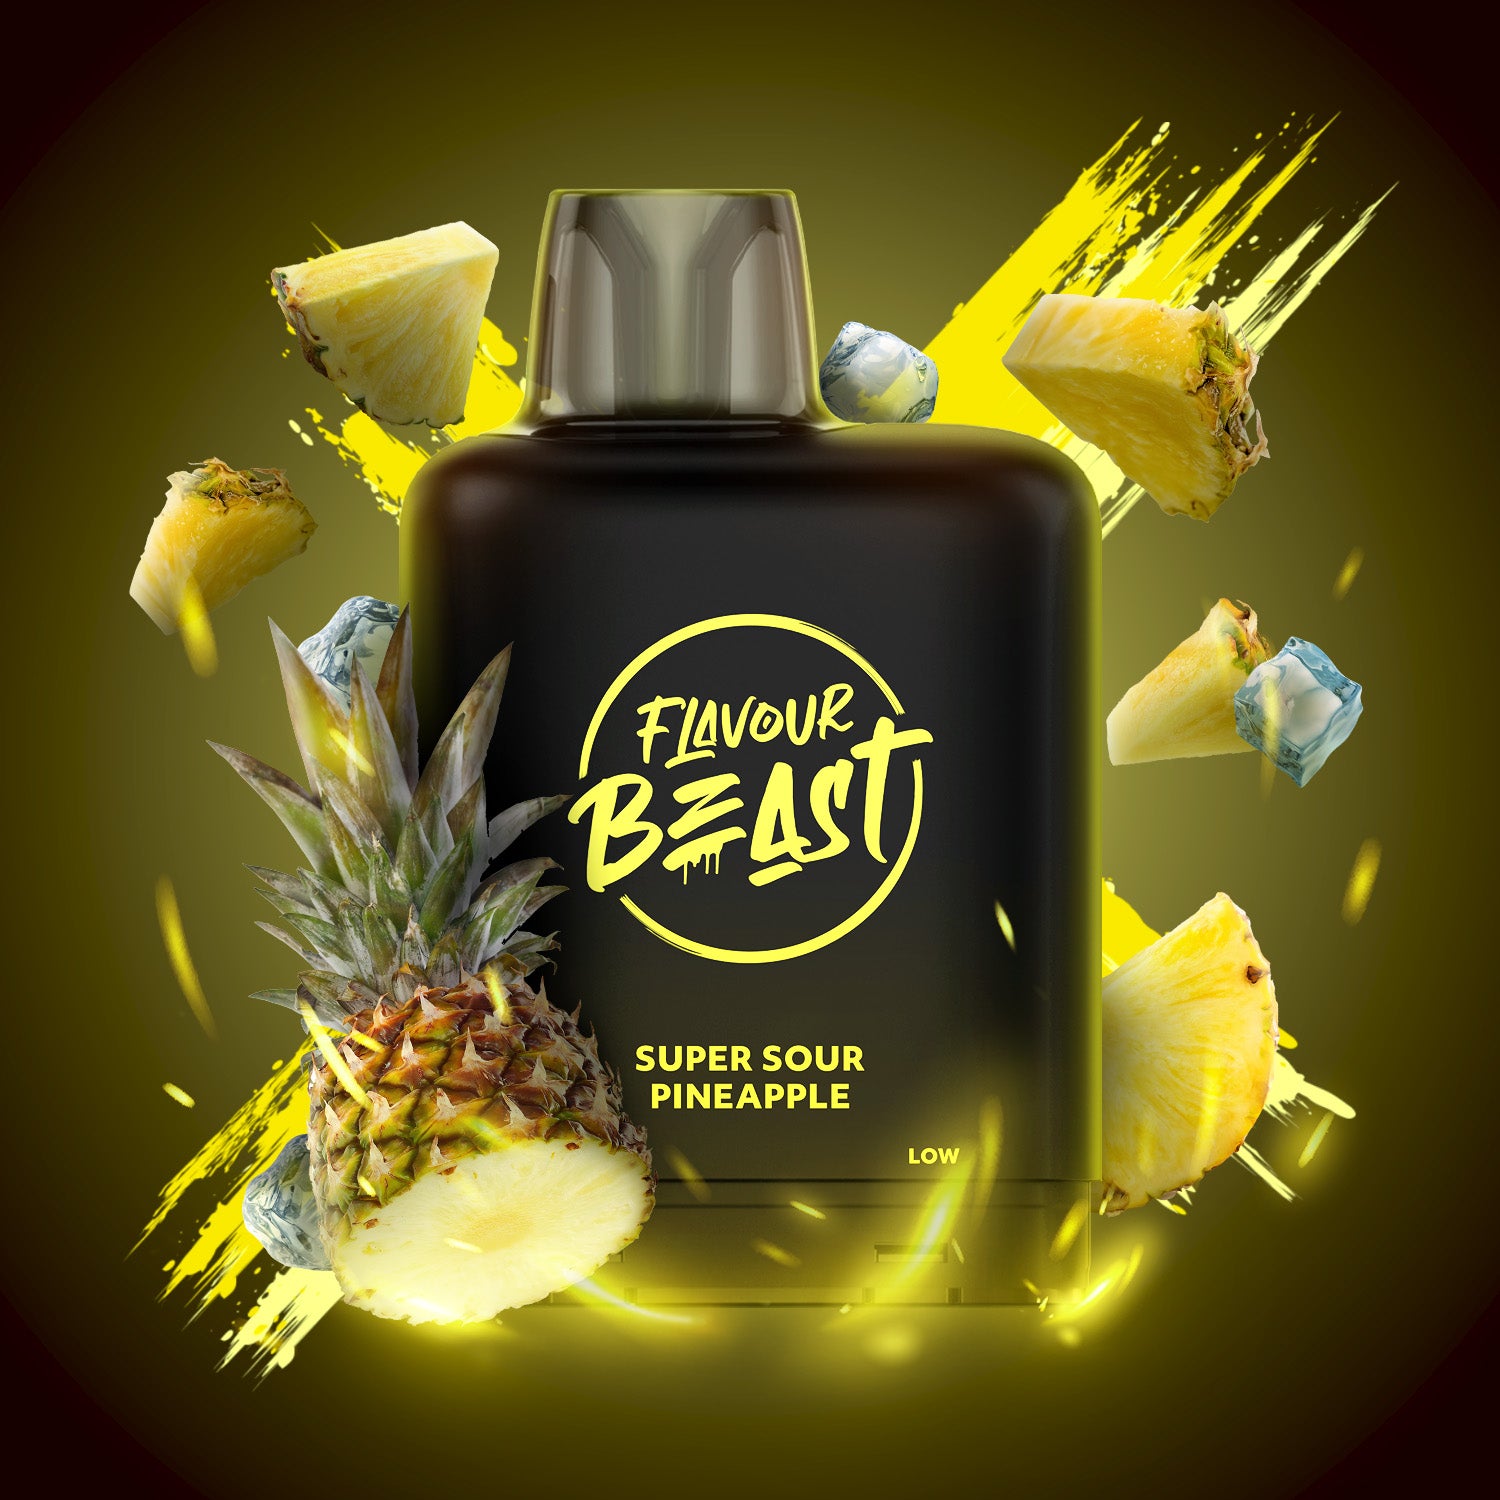 LEVEL X BOOST FLAVOUR BEAST Super Sour Pineapple 2